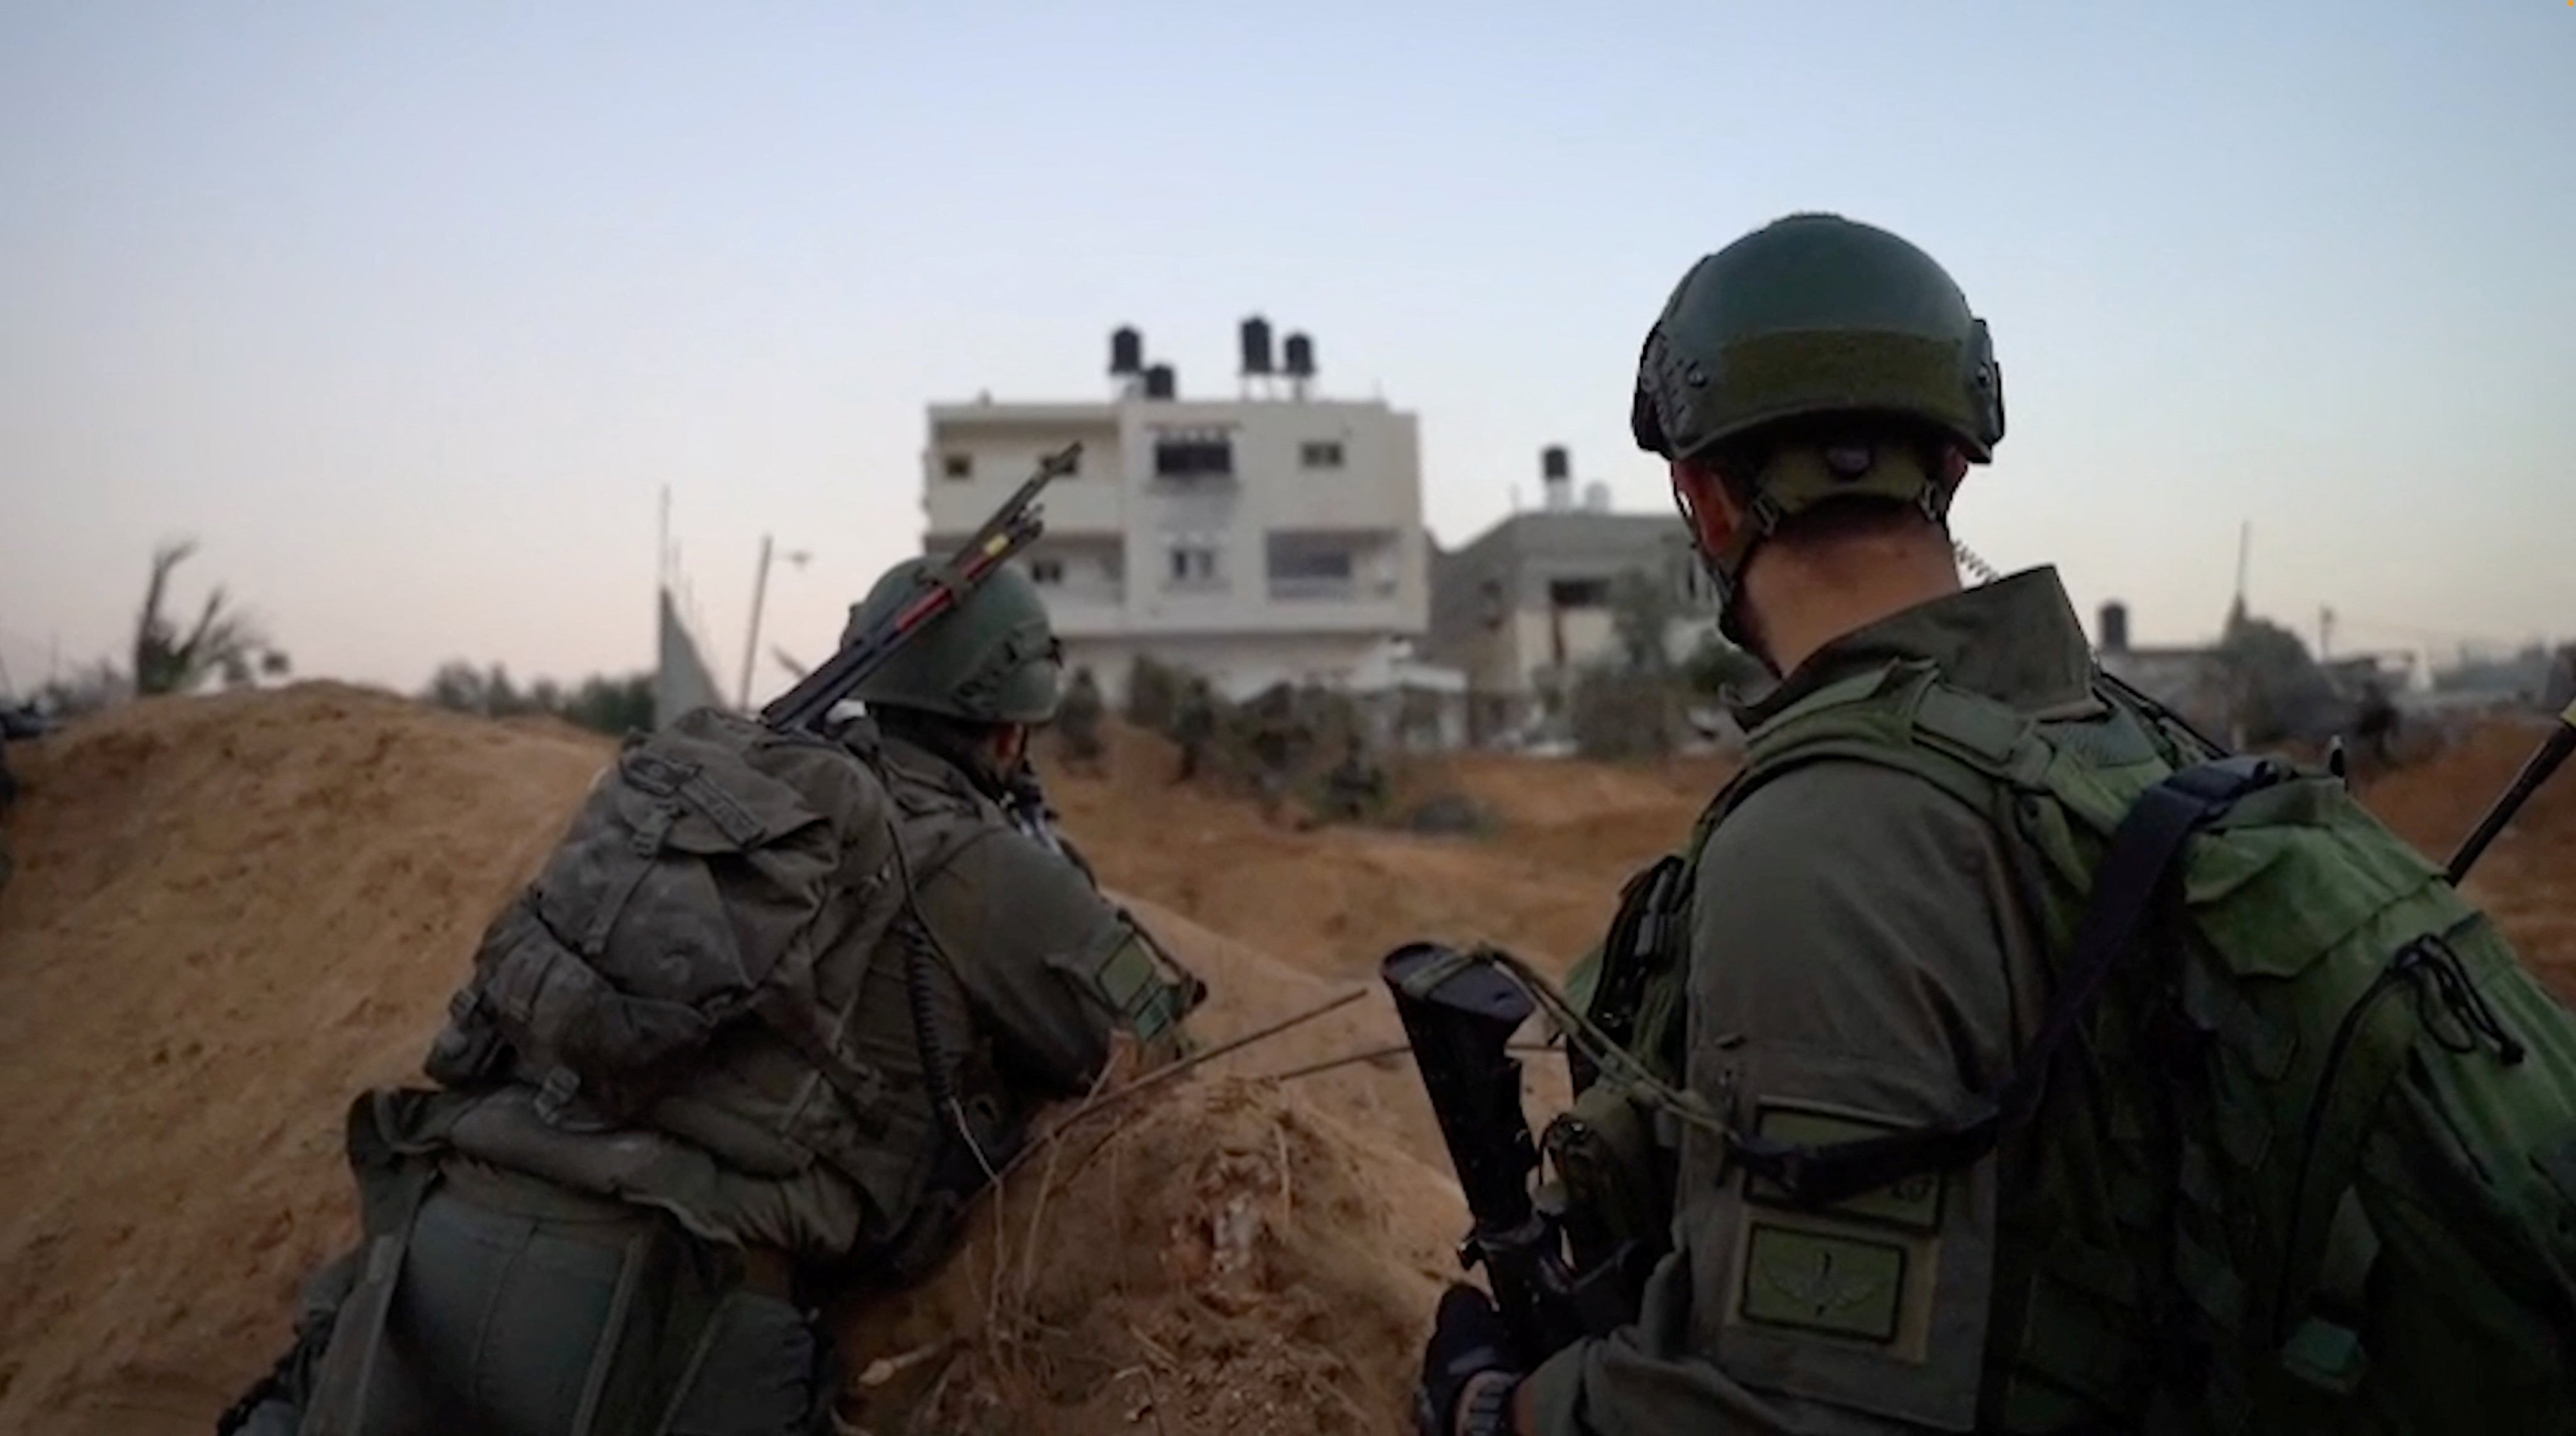 Israeli soldiers in a location given as Khan Younis, Gaza on Friday. Photo: Israel Defence Forces / Handout via Reuters